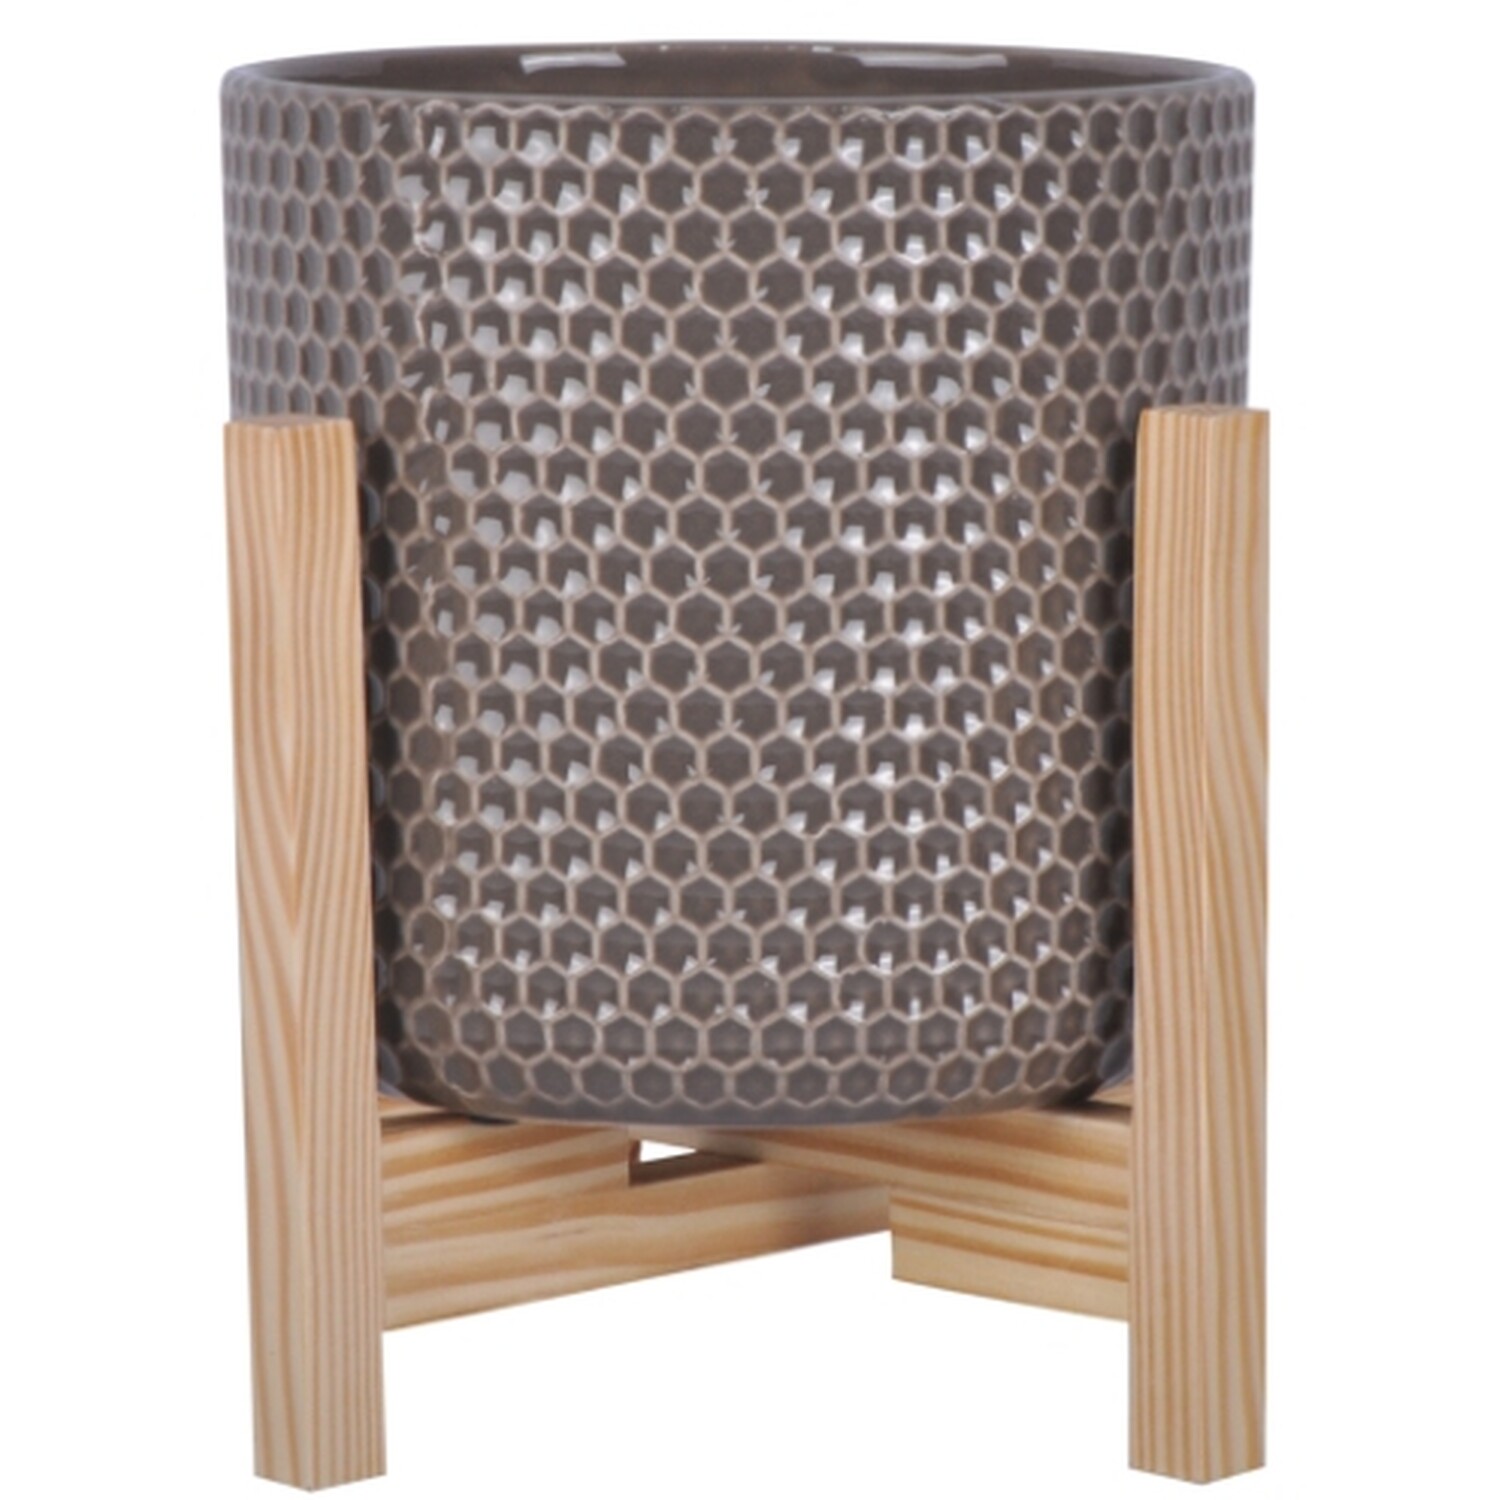 Honeycomb Finish Planter Stands - Taupe Image